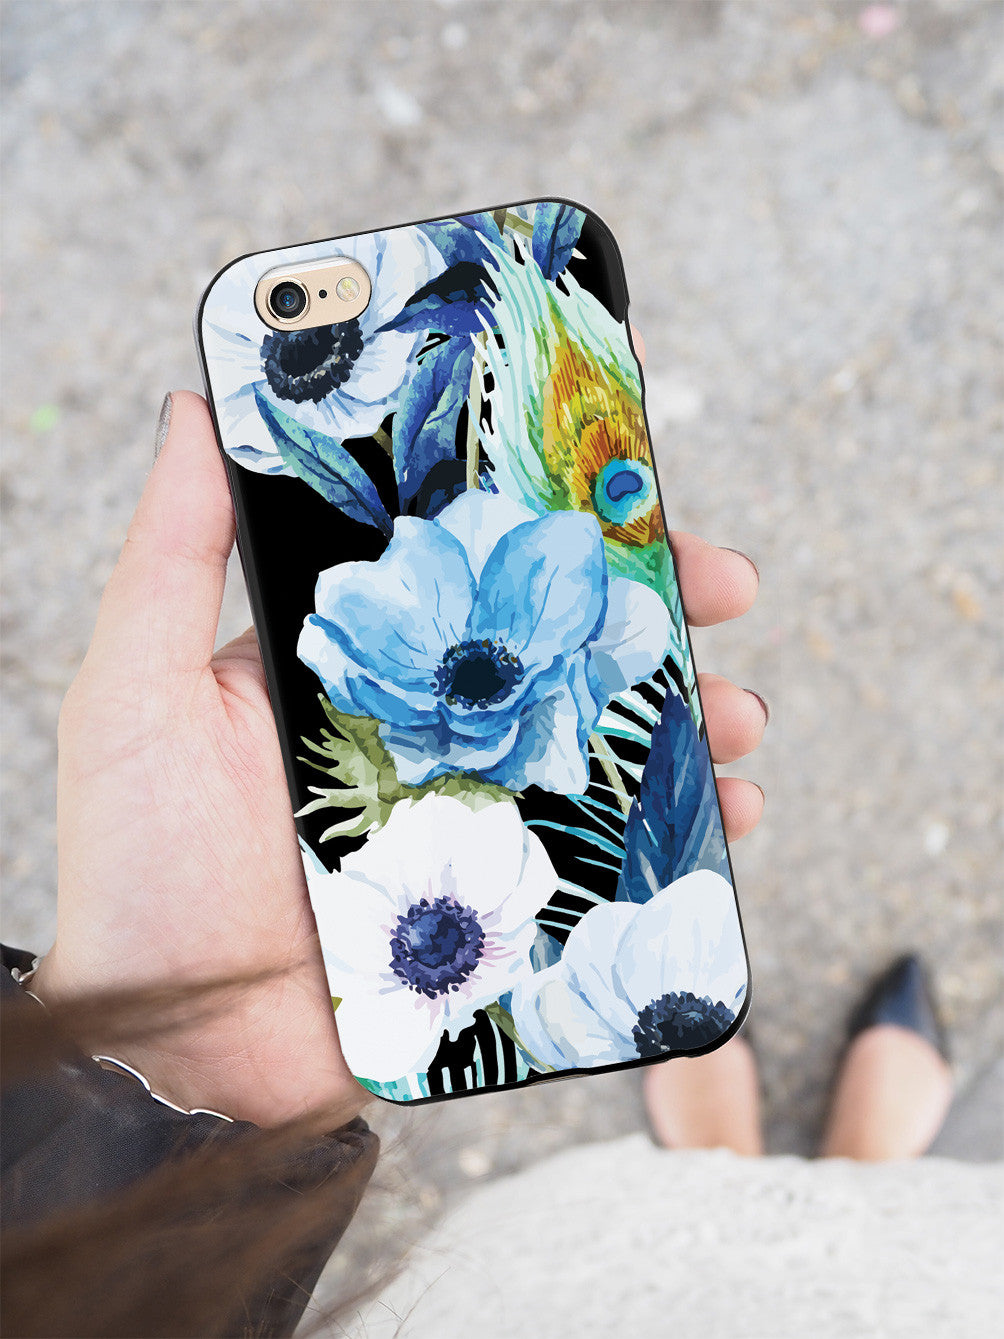 Peacock Feather Flowers - Black Case